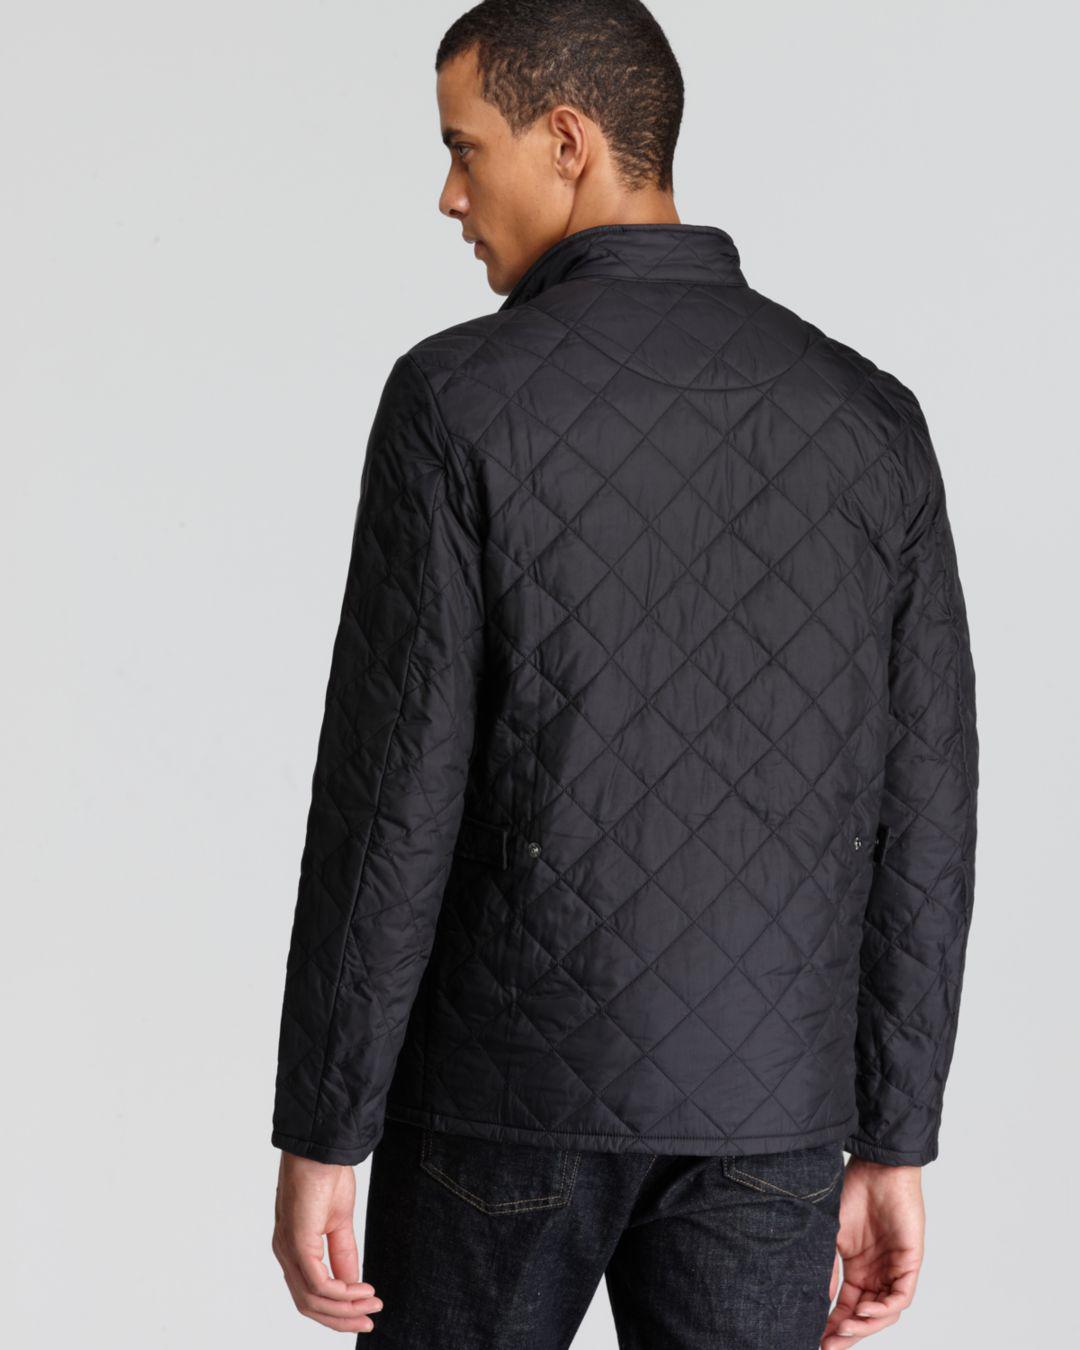 Barbour Synthetic Flyweight Chelsea Quilted Jacket in Black for Men - Lyst